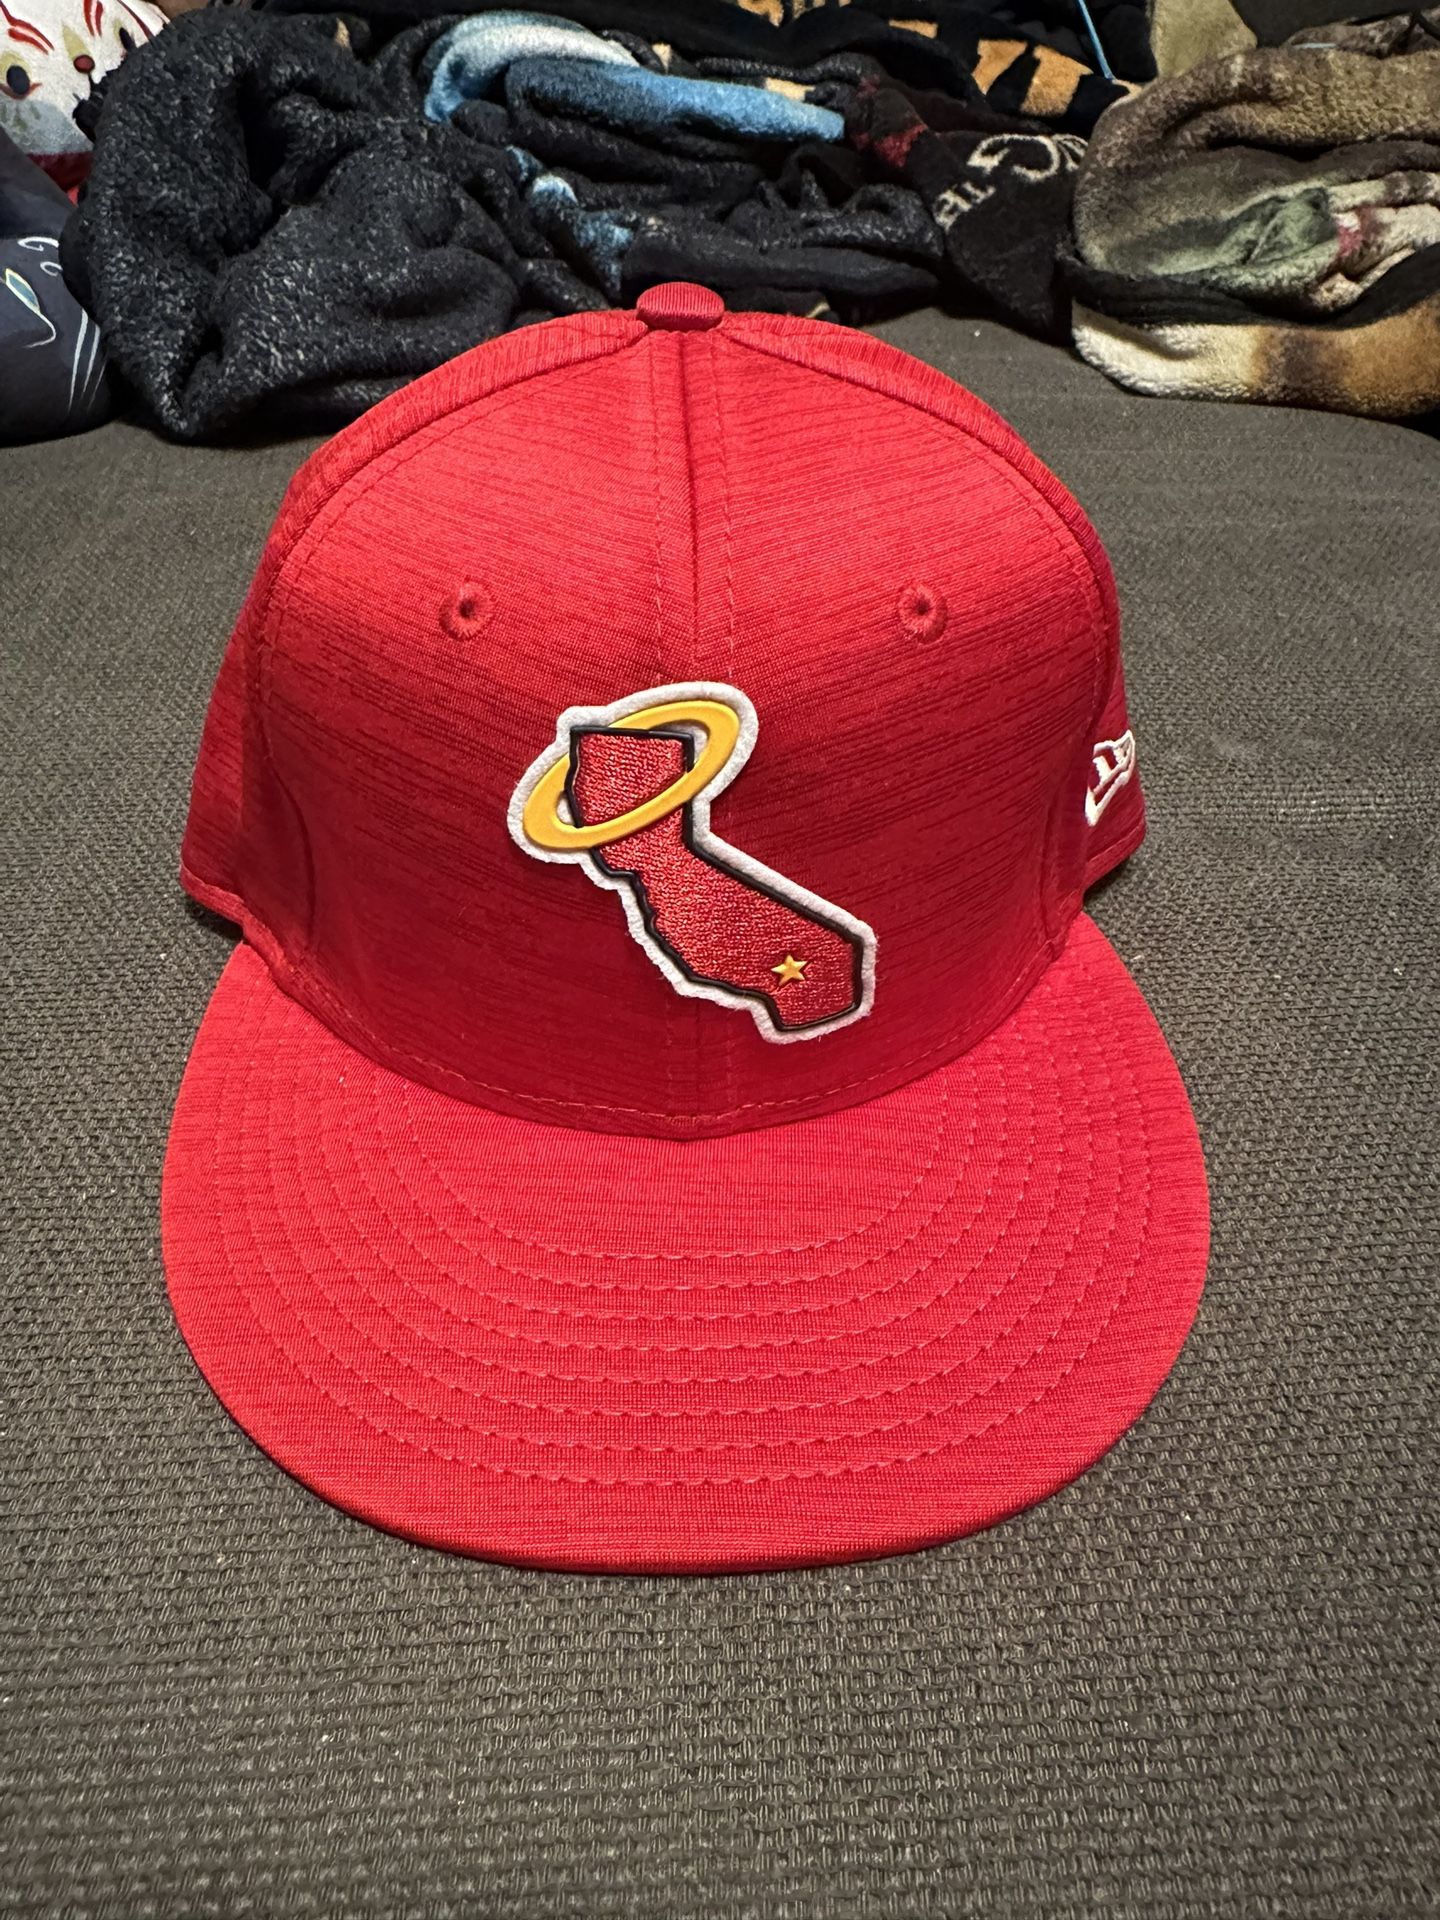 Angels Fitted Hats 